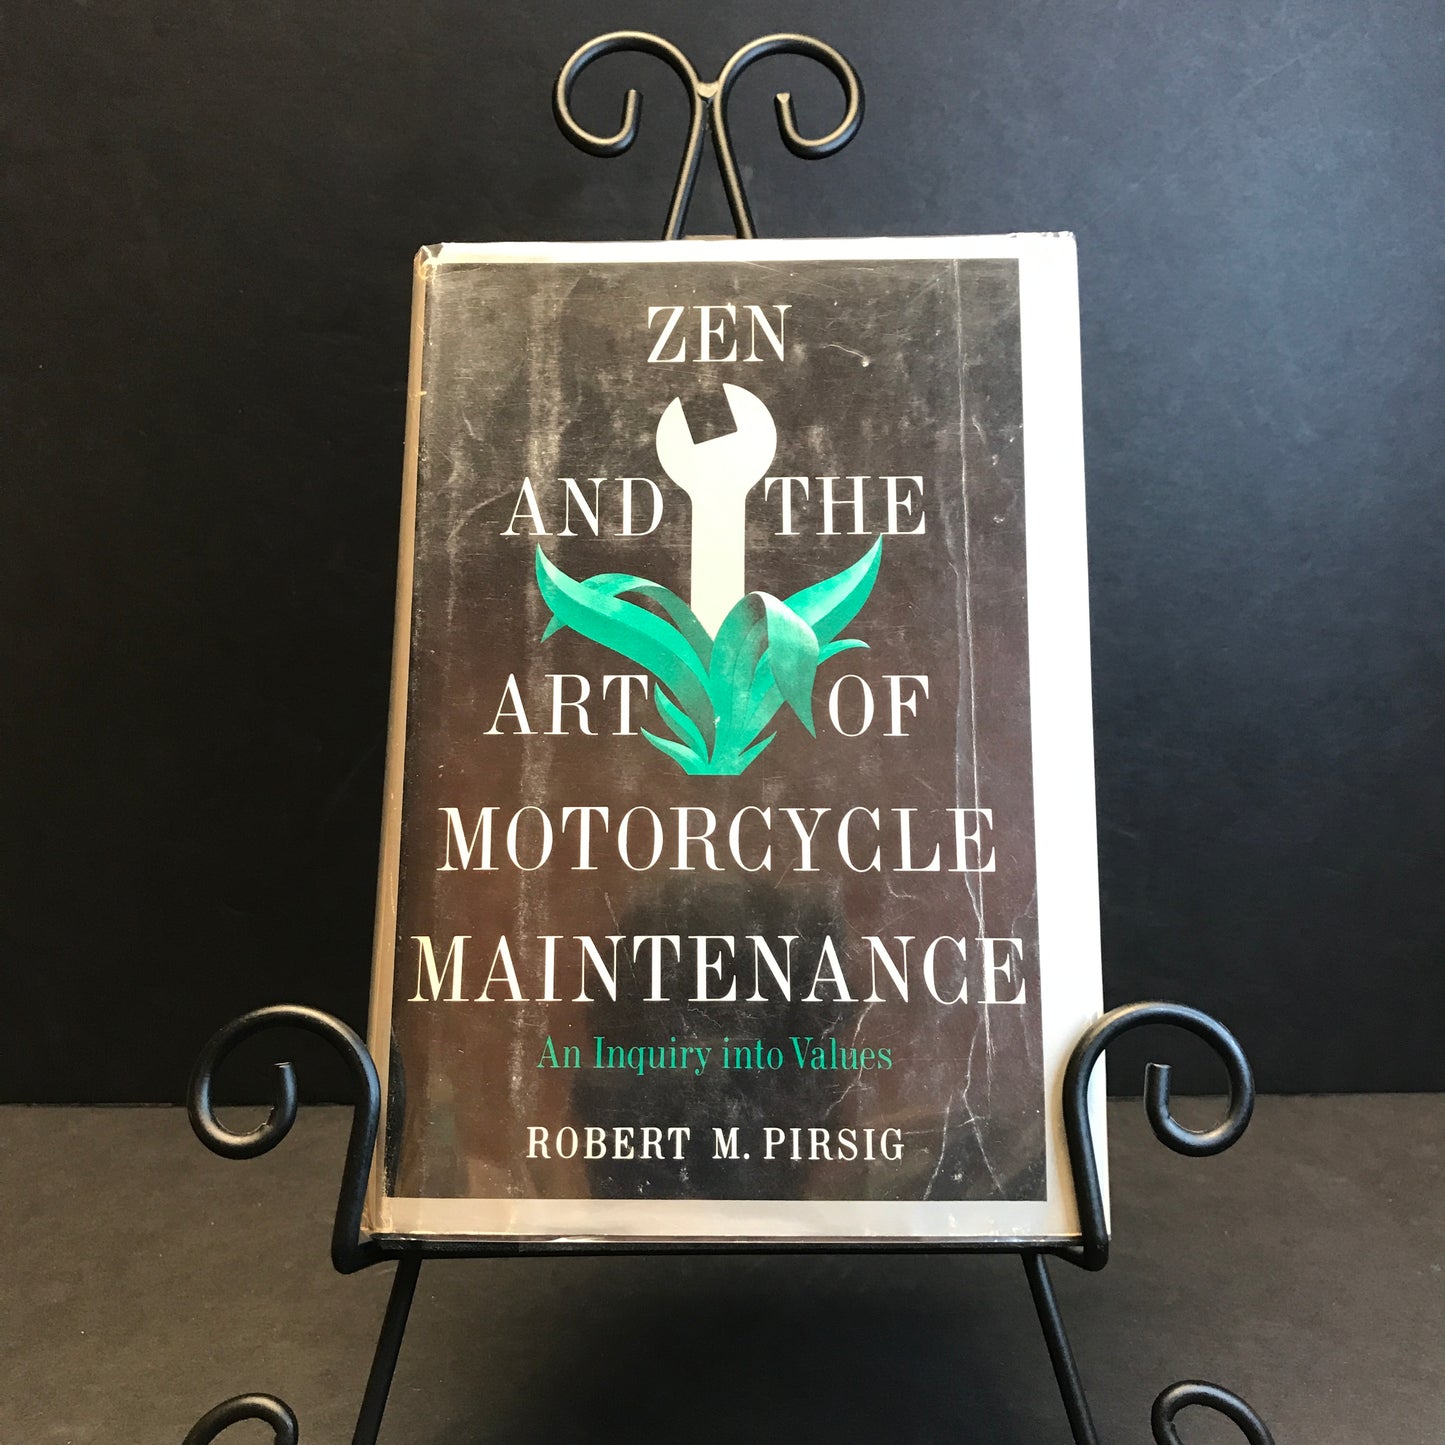 Zen and the Art of Motorcycle Maintenance - Robert M. Pirsig - Possible 1st, Price Clipped - 1974